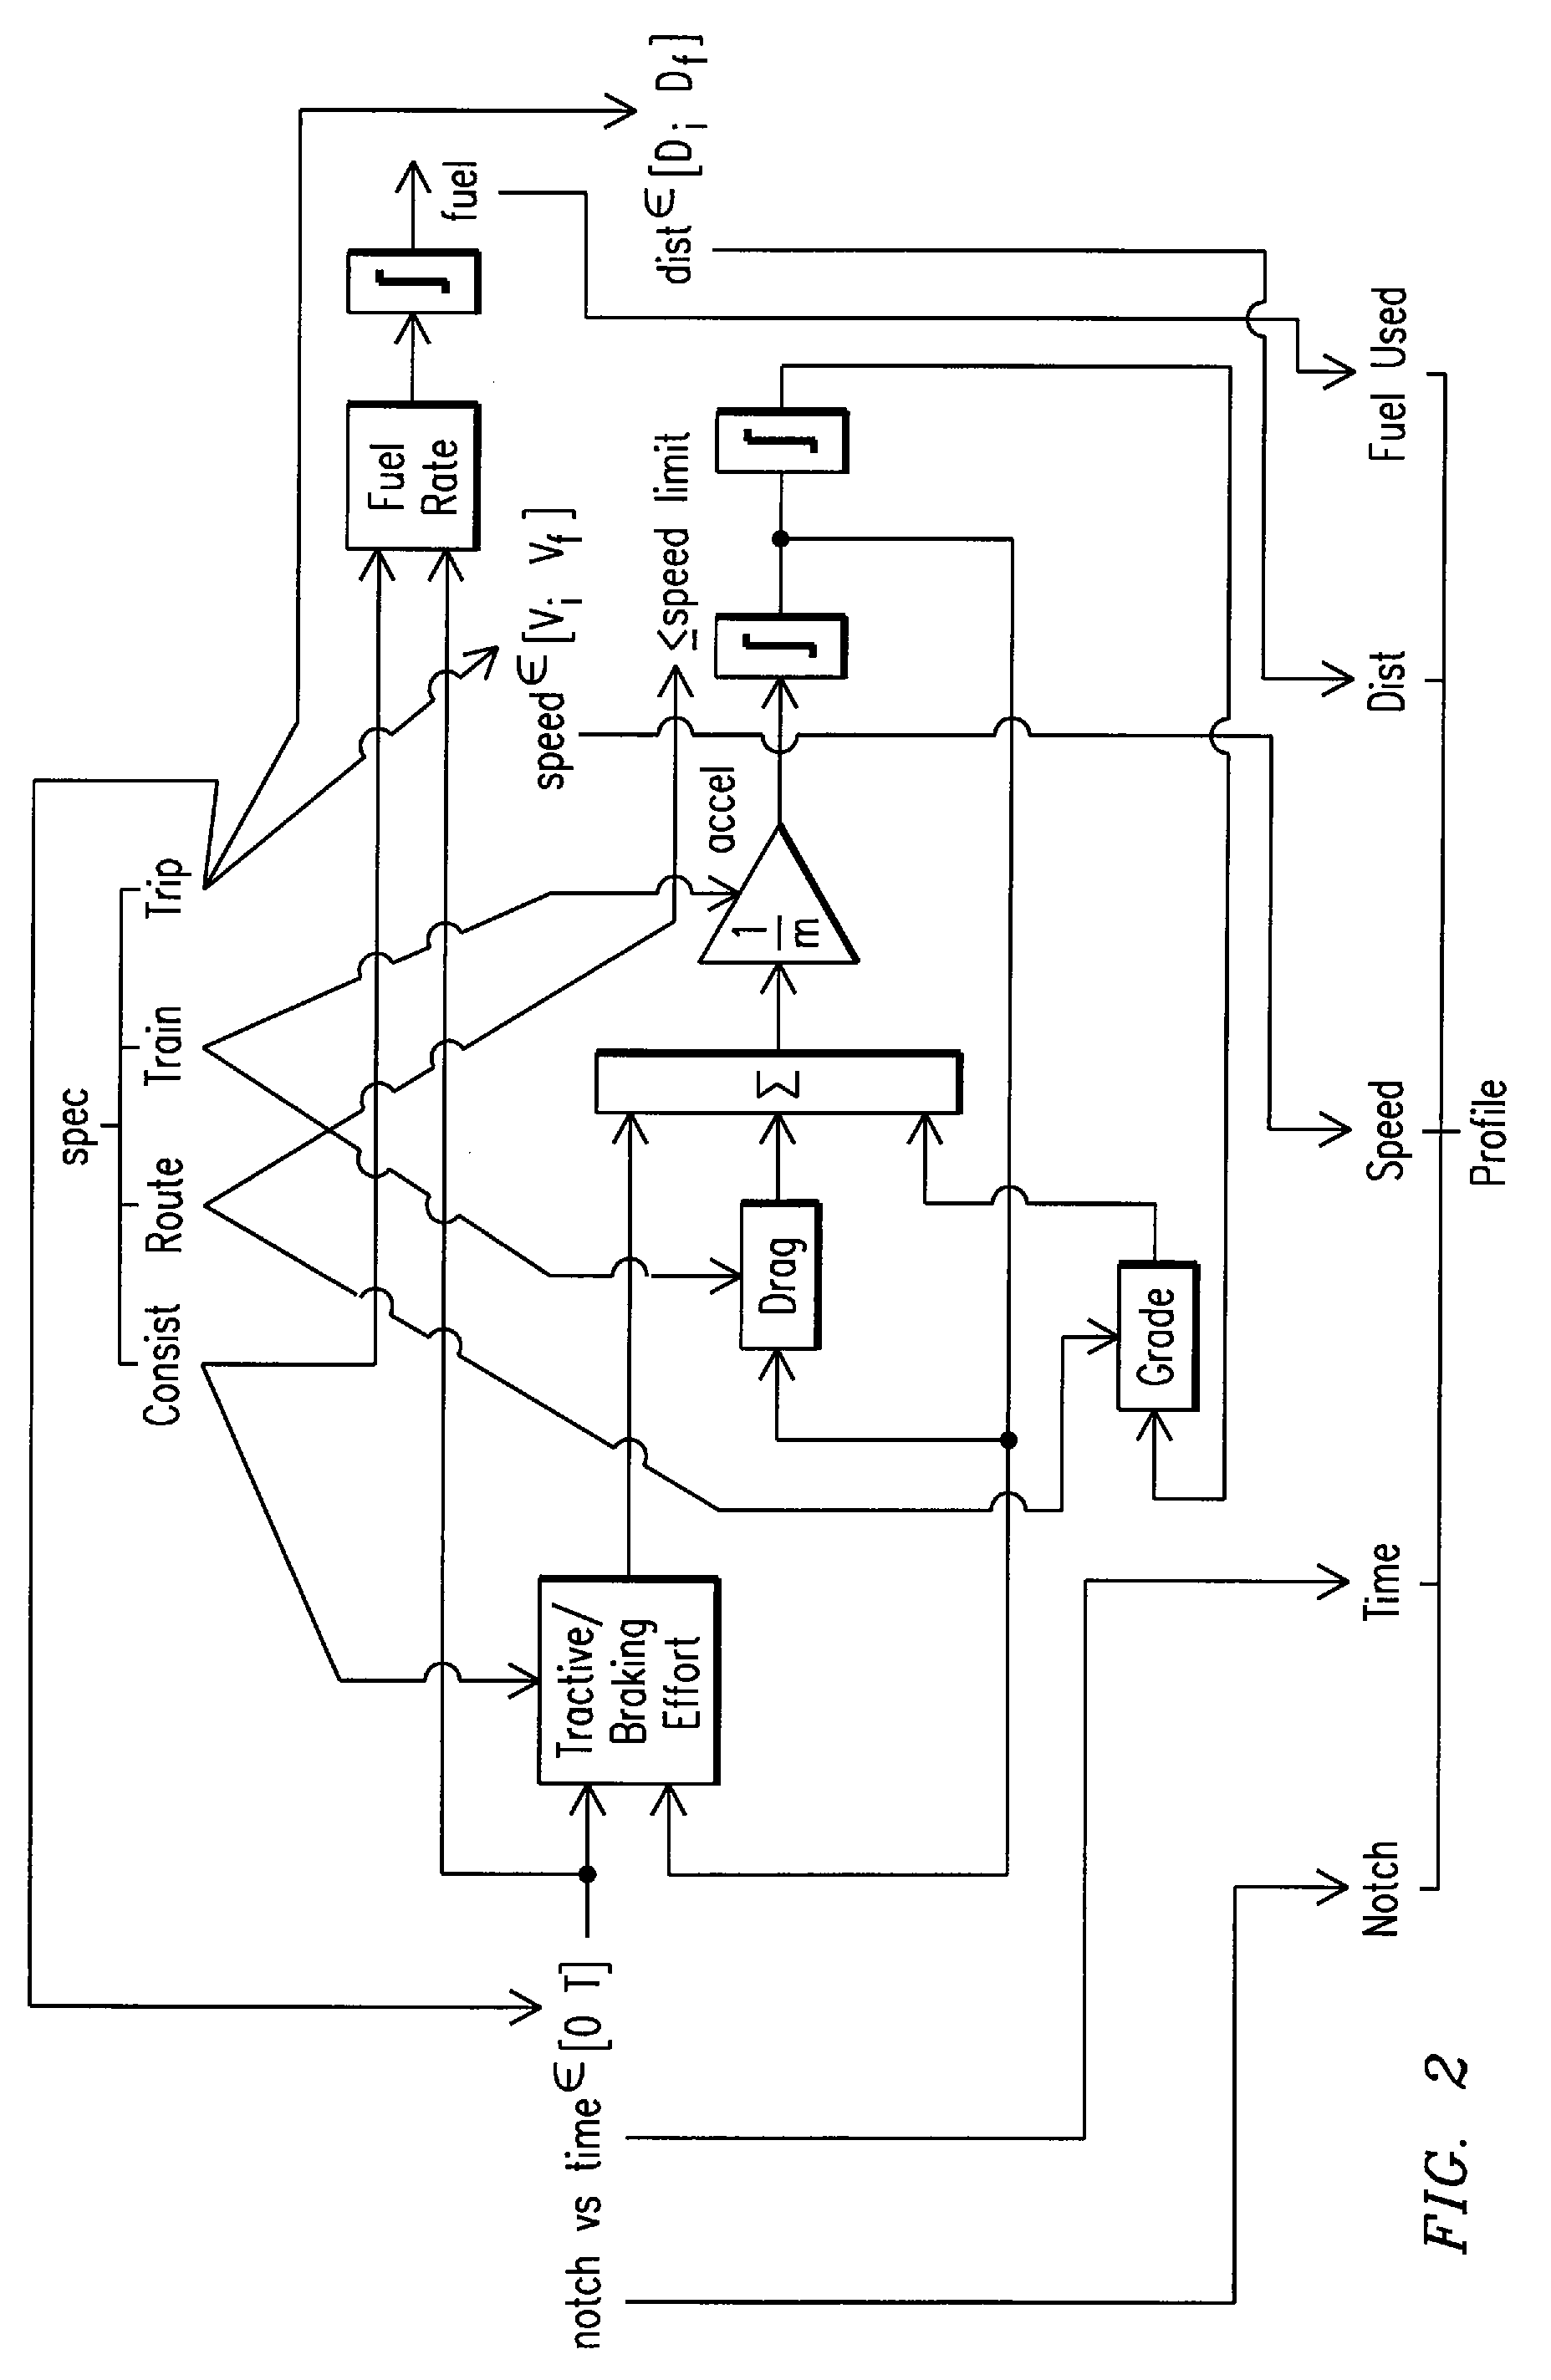 System and Method for Optimized Fuel Efficiency and Emission Output of a Diesel Powered System